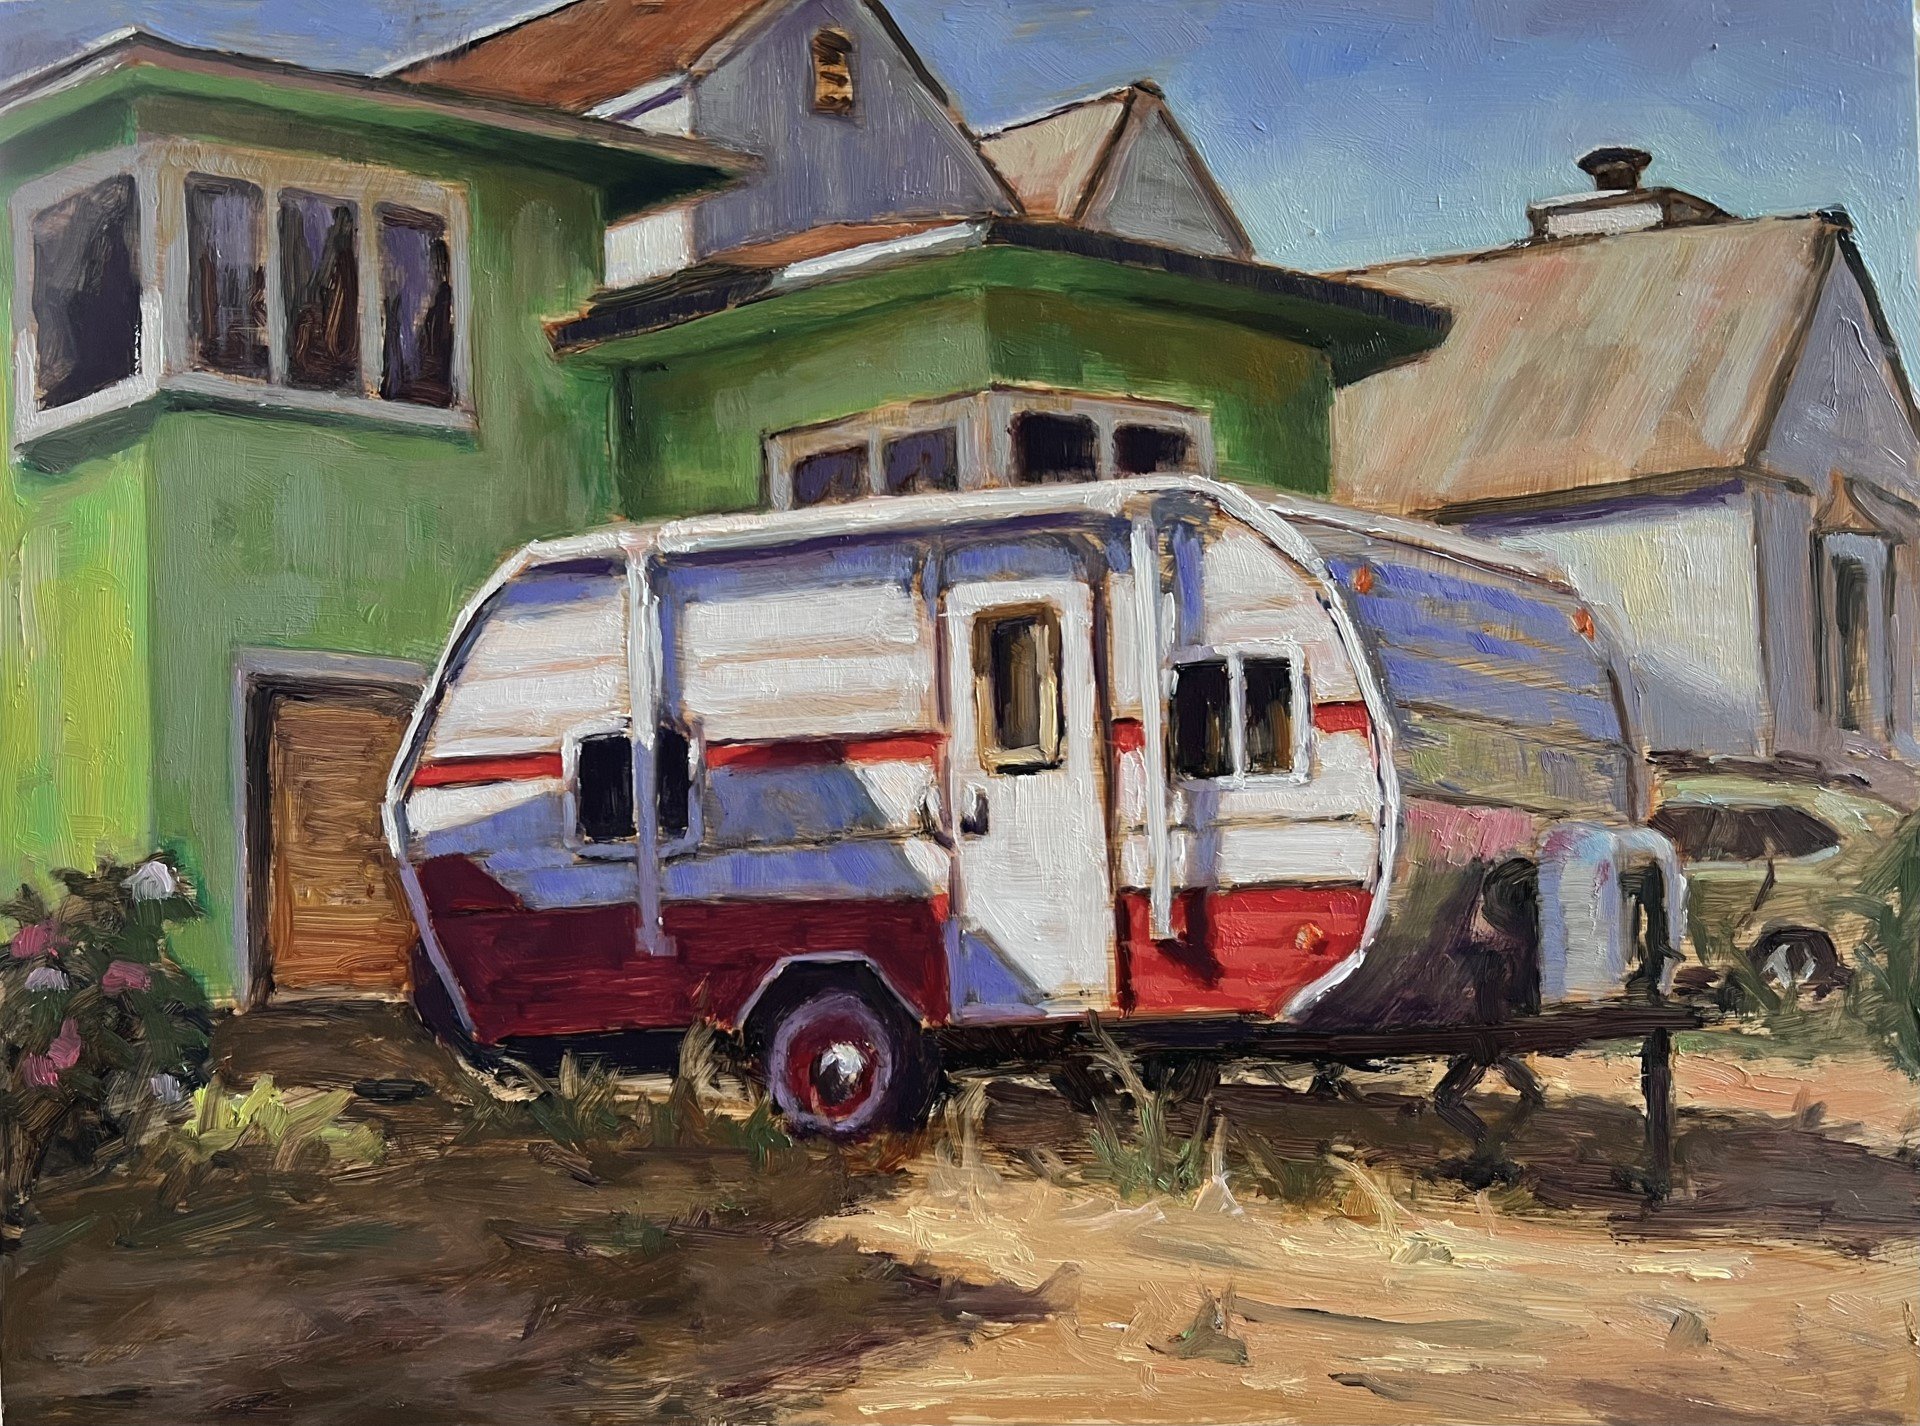 Red Camper in the Sunset District by Maura Carta